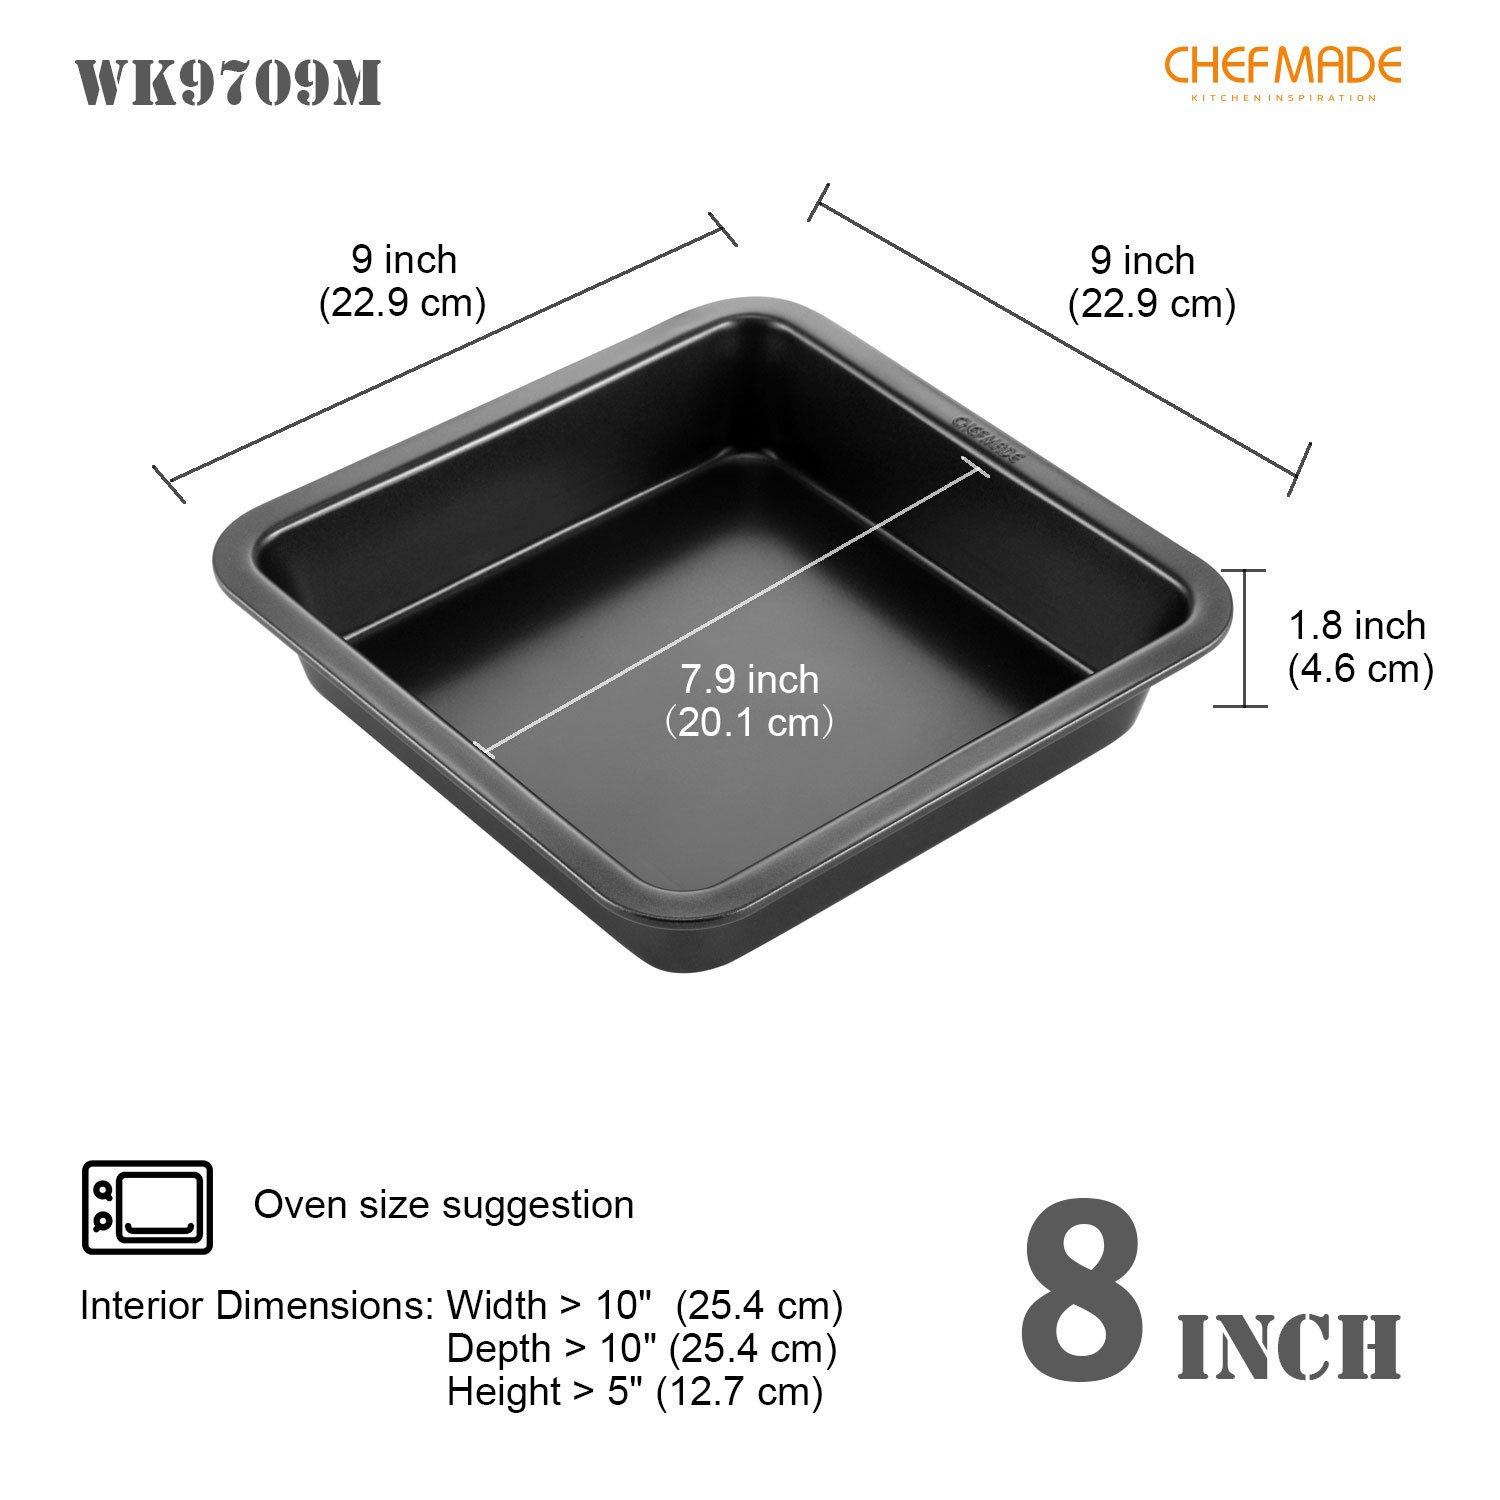 Cookie Sheet Non Stick Small, Bakeware